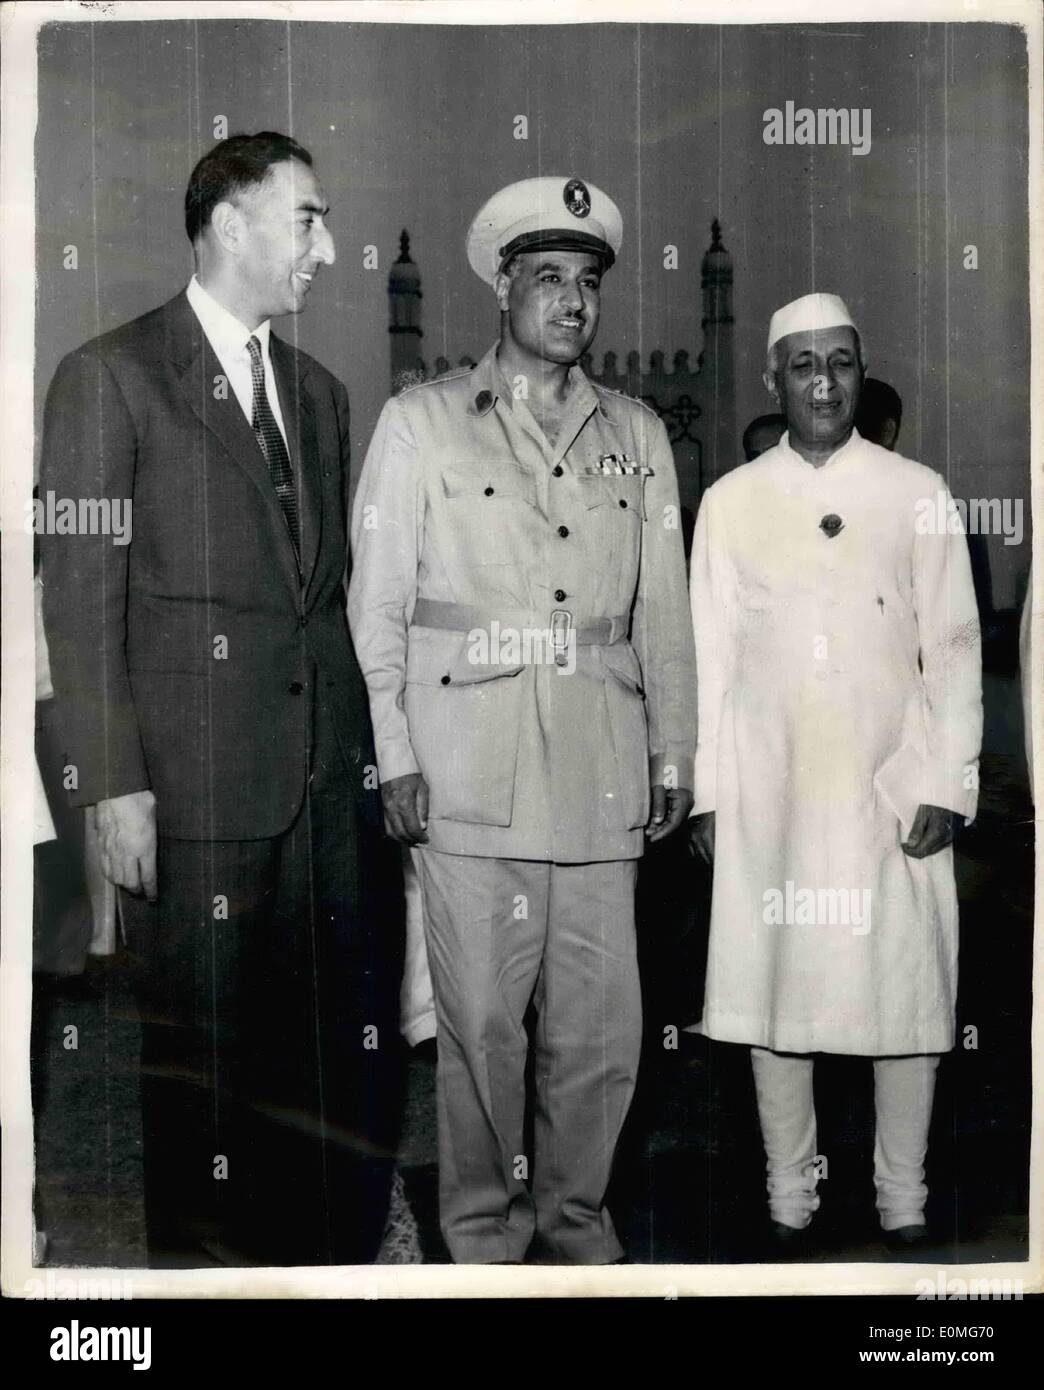 Apr. 18, 1955 - 18-4-55 Lieut. Col. Nasser and other delegates to the Asian African conference arrive in Delhi. Lieut. Col. Nasser, the Prime Minister of Egypt and His Royal Highness Sardar Mohammed Naim, Deputy Prime Minister and Foreign Minister of Afghanistan were received by Mr. Nehru when they arrived in Delhi recently on their ways to the Asian-African Conference at Bandung, Indonesia. A huge reception was held in Delhi at which they spoke from a Dias which was a replica of the throne in Red Fort, Delhi. Keystone Photo Shows: Mr. Nehru with Lieut. Col Stock Photo